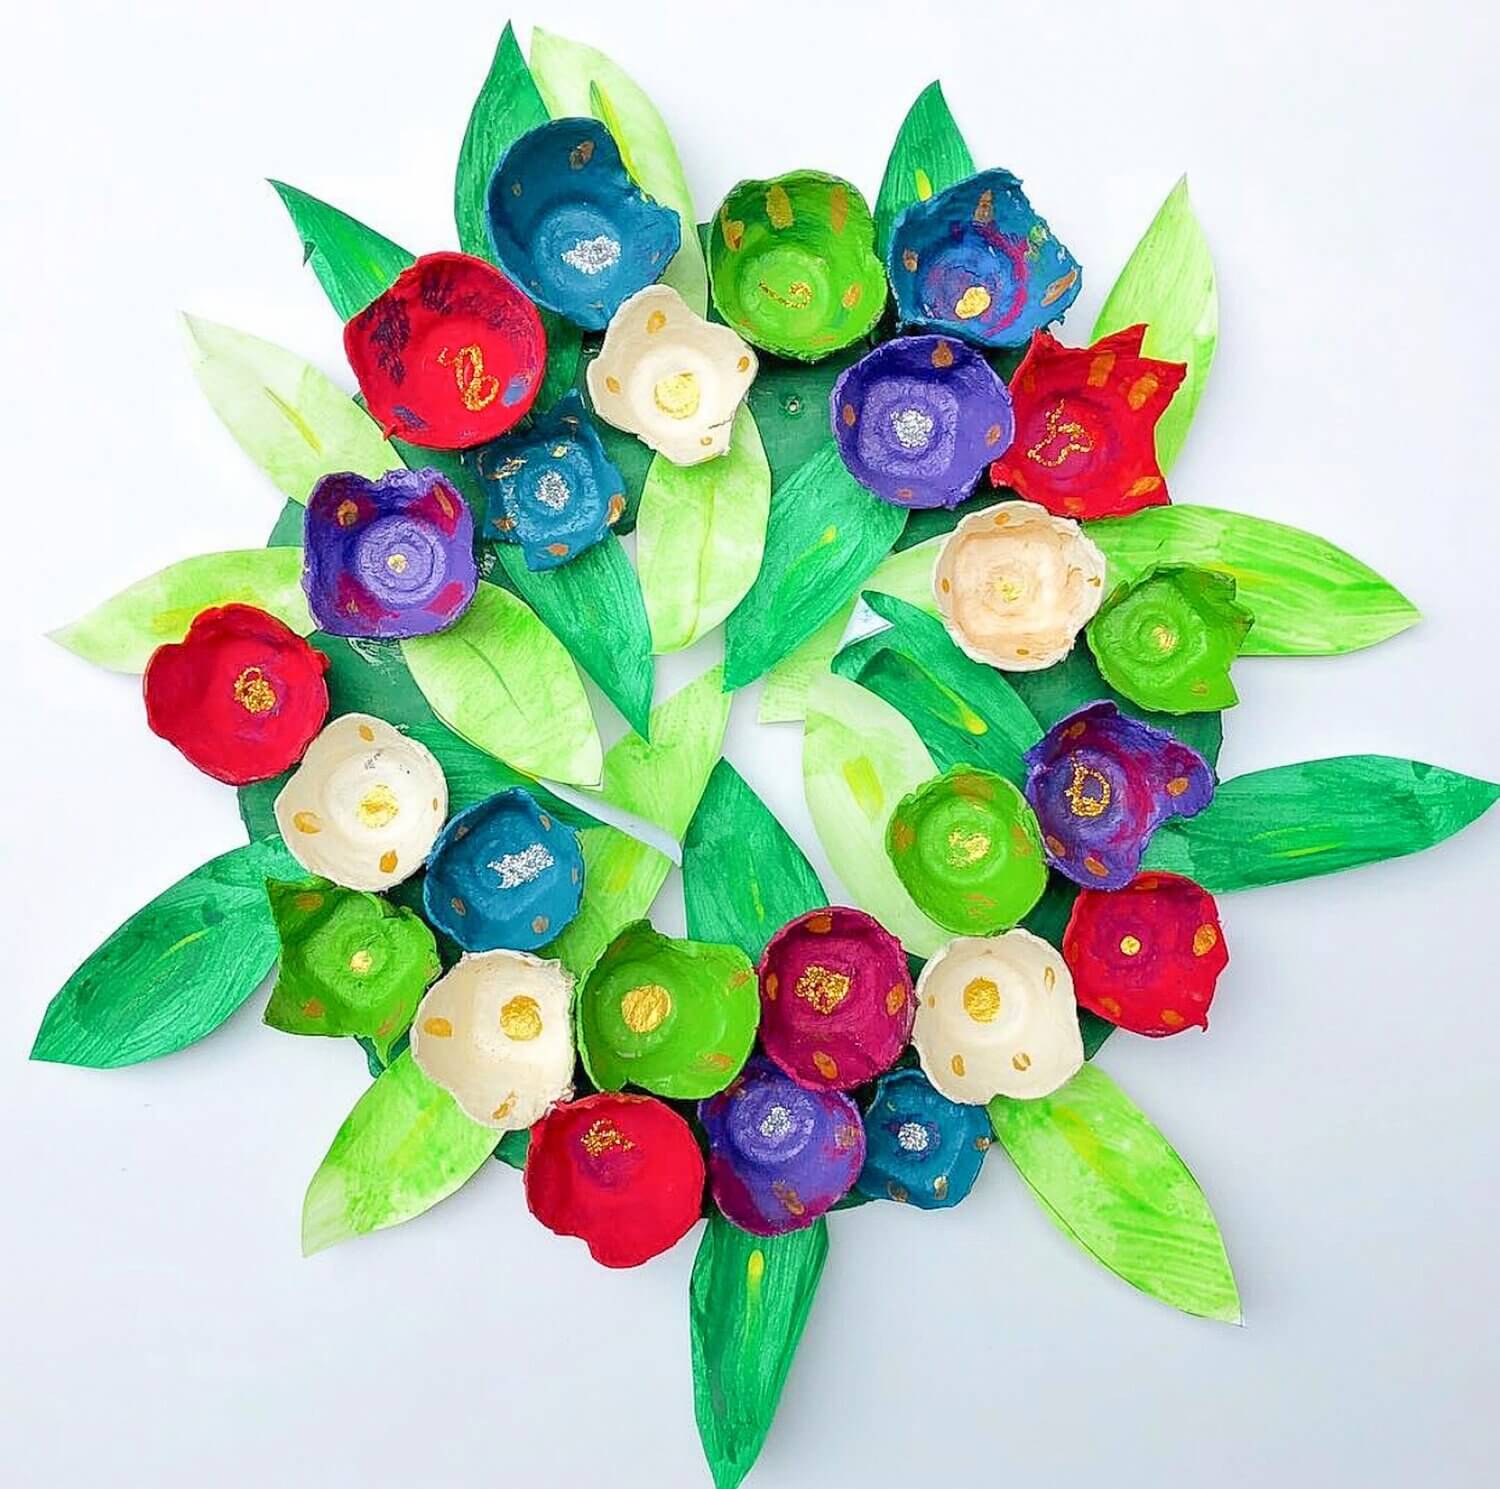 Let's Make Fabulous Egg Carton Wreath For Wall DecorEgg Tray Wall Hanging Crafts